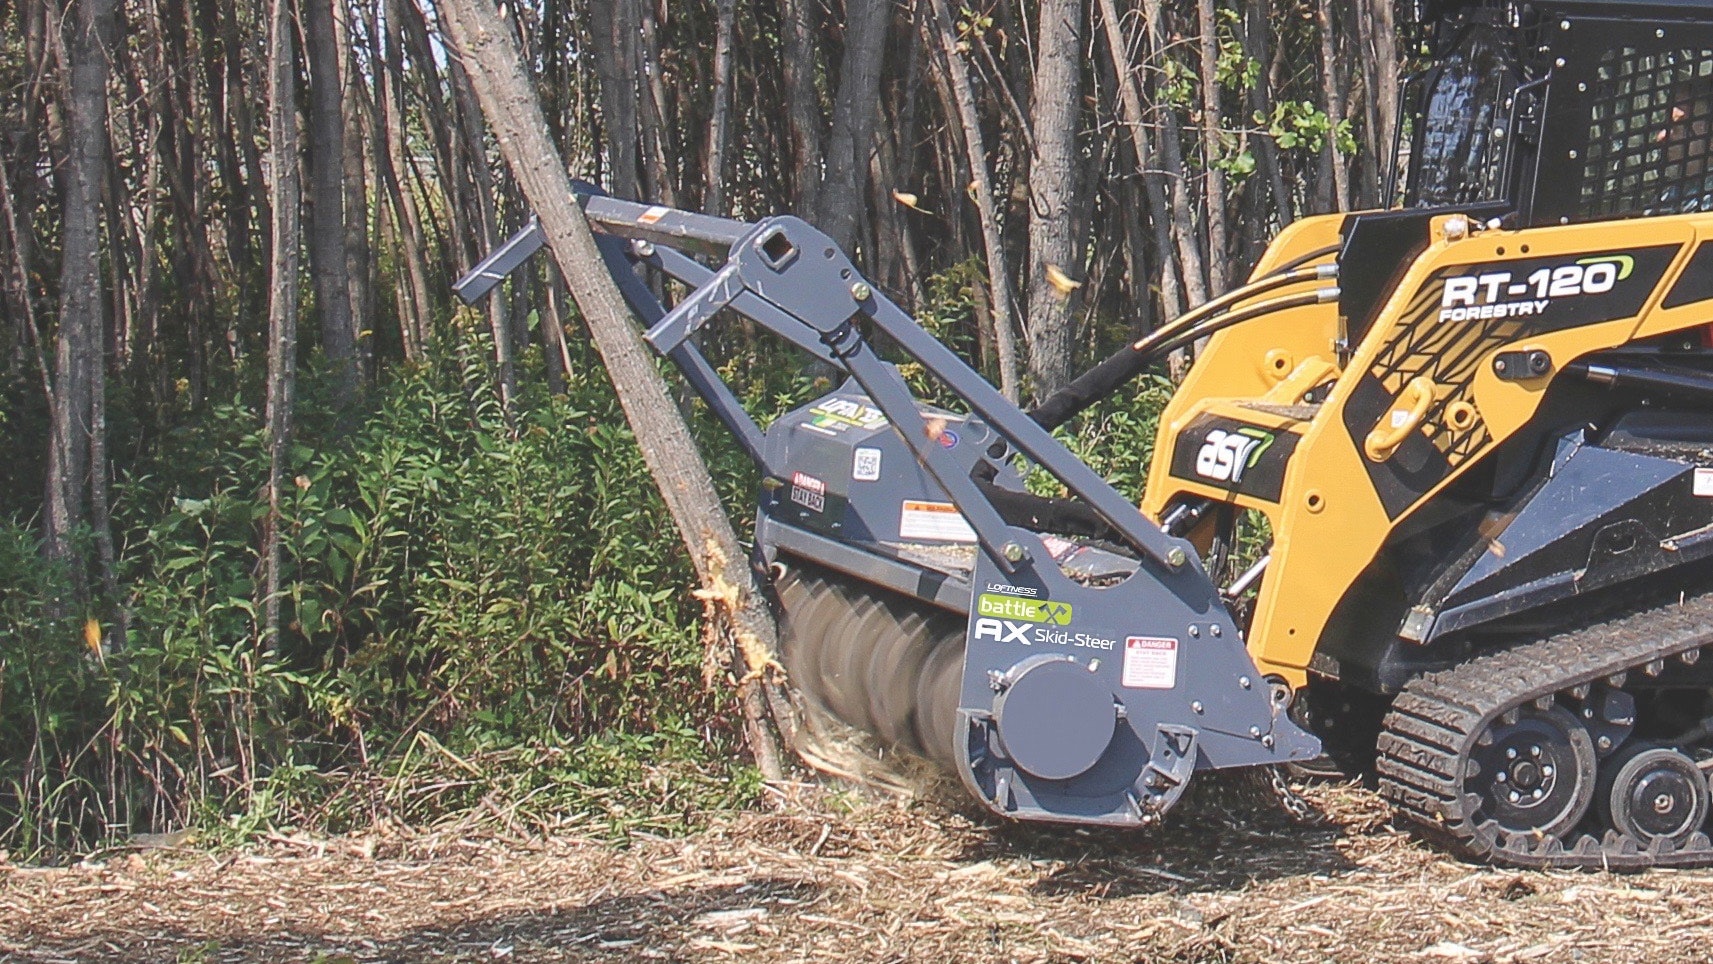 Loftness Battle Ax Mulching Attachment For Skid Steers From Loftness Specialized Equipment For Construction Pros